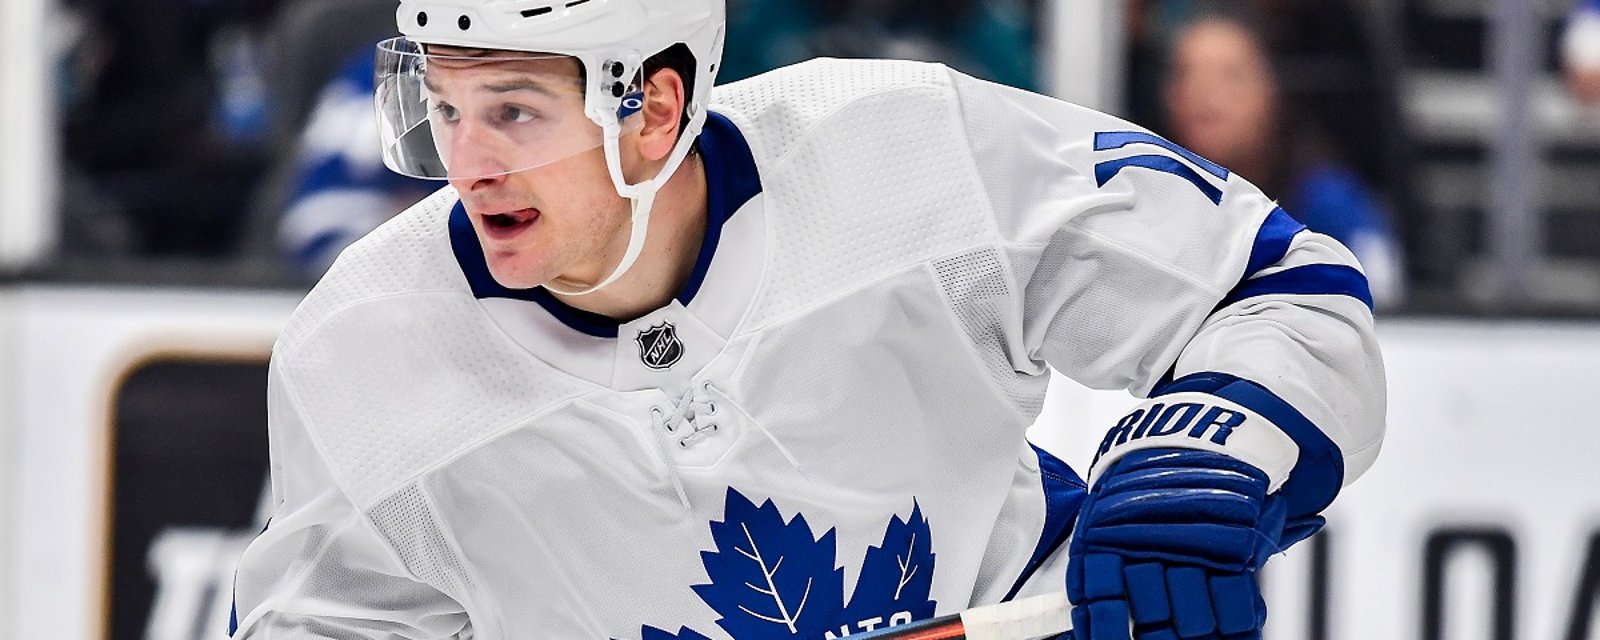 Maple Leaf Zach Hyman provides an update live from his hospital bed!